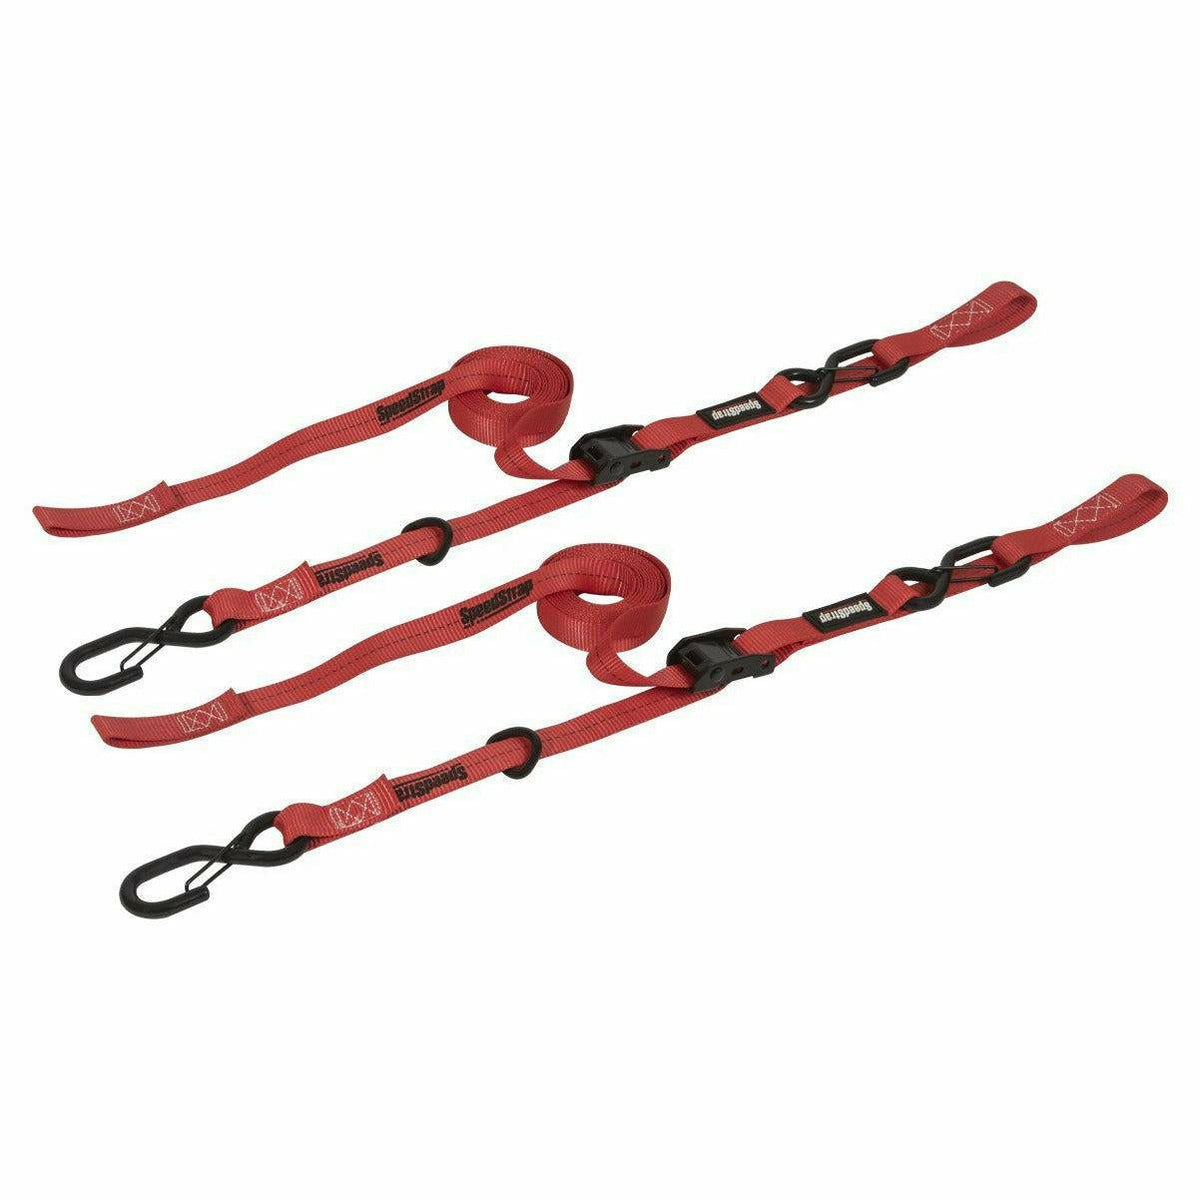 Speed Strap 1"x10' Cam-Lock Tie Down with Snap S Hooks and Soft-Tie (2 Pack)